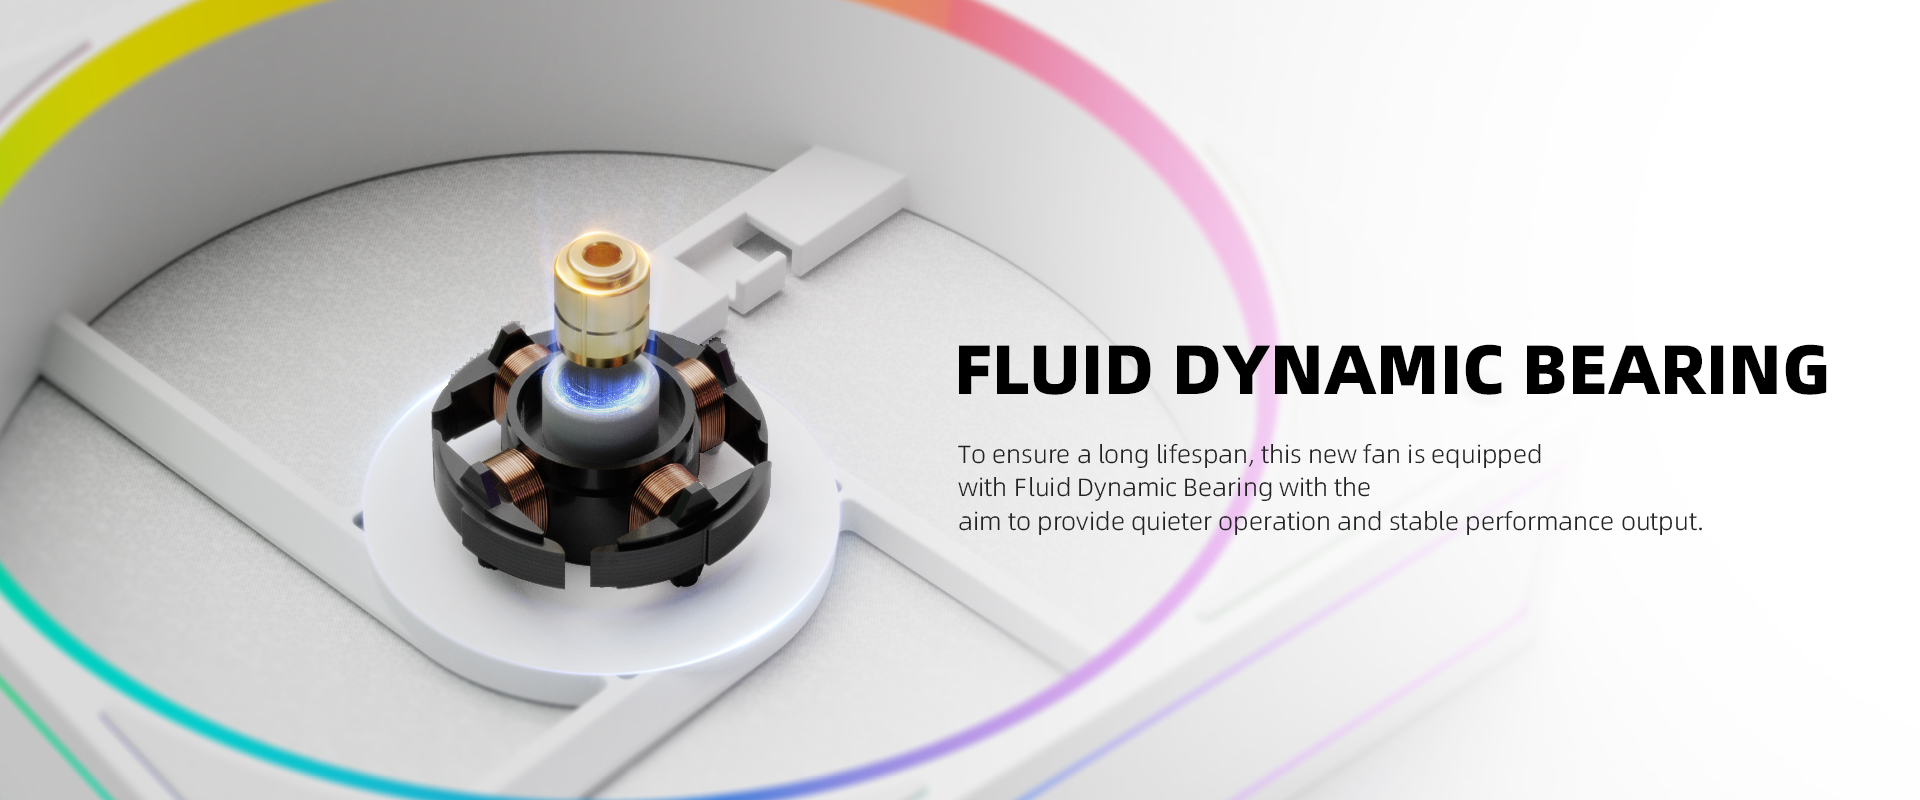 A large marketing image providing additional information about the product ID-COOLING FROZN A610 ARGB CPU Cooler - White - Additional alt info not provided